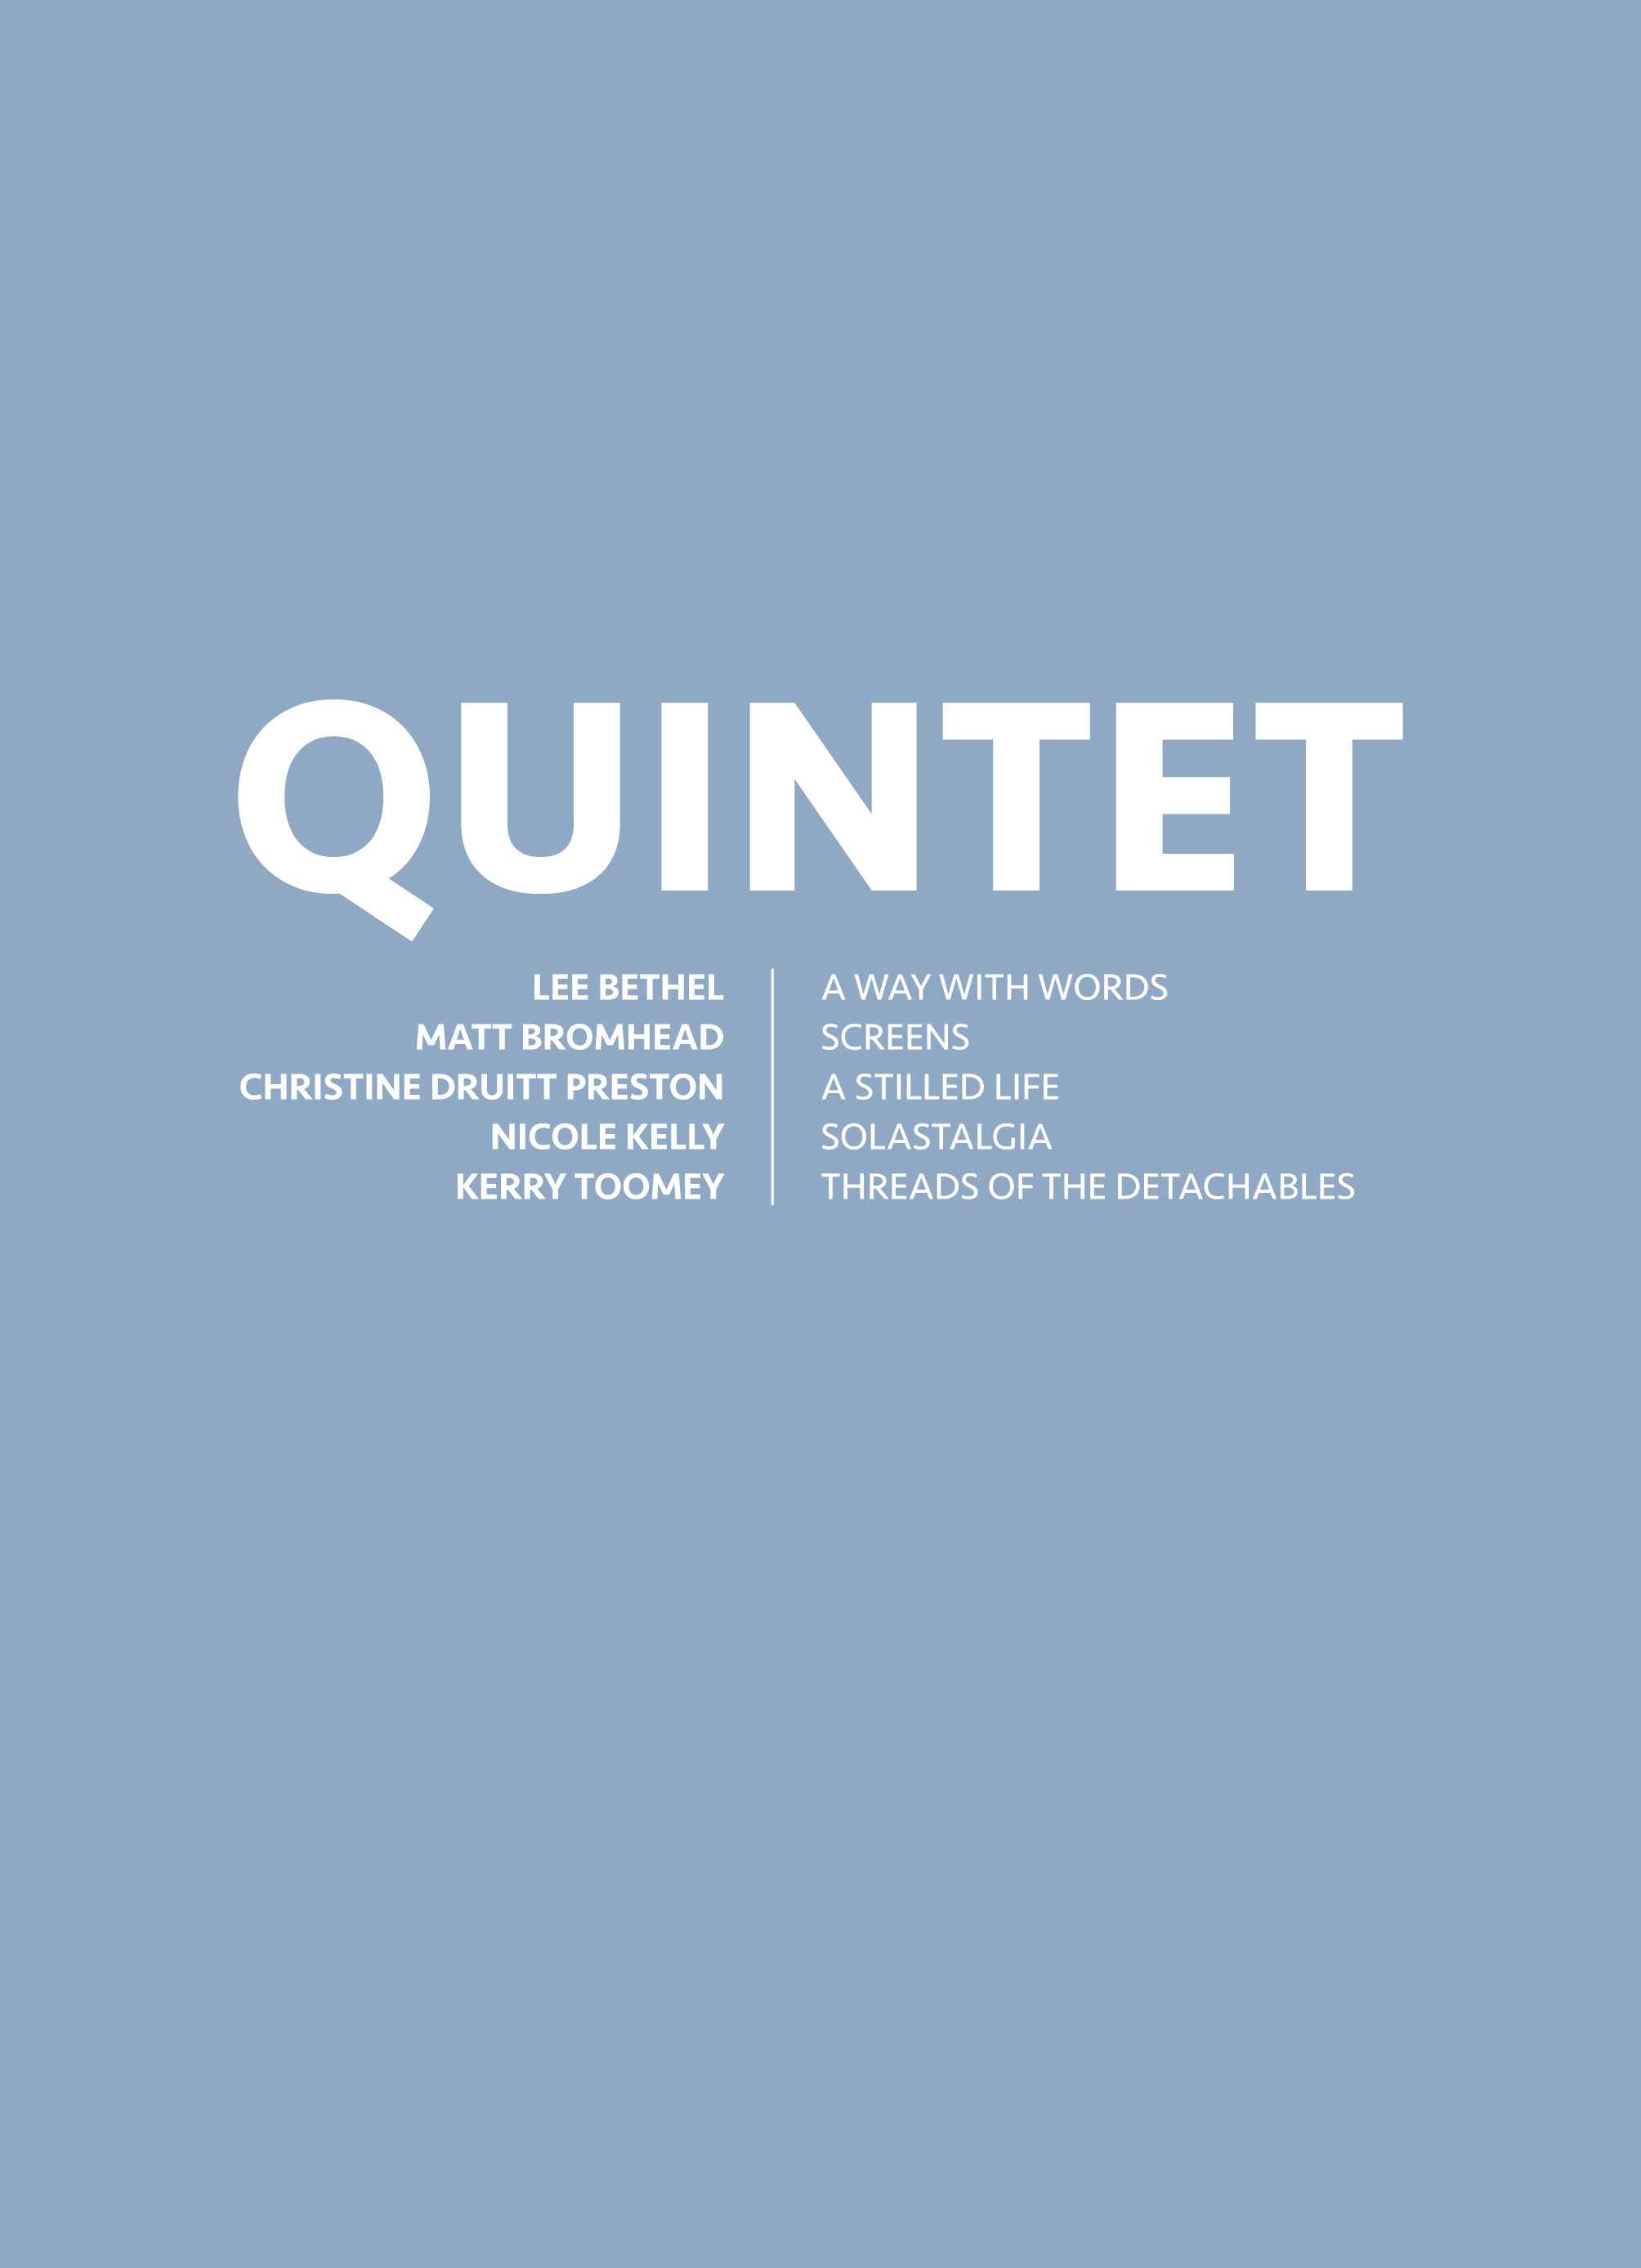 The cover of an exhibition catalogue featuring a duck egg blue cover with the exhibition title 'Quintet' in a medium thickness white font. The artist names and their exhibition titles are in a smaller font listed underneath, 